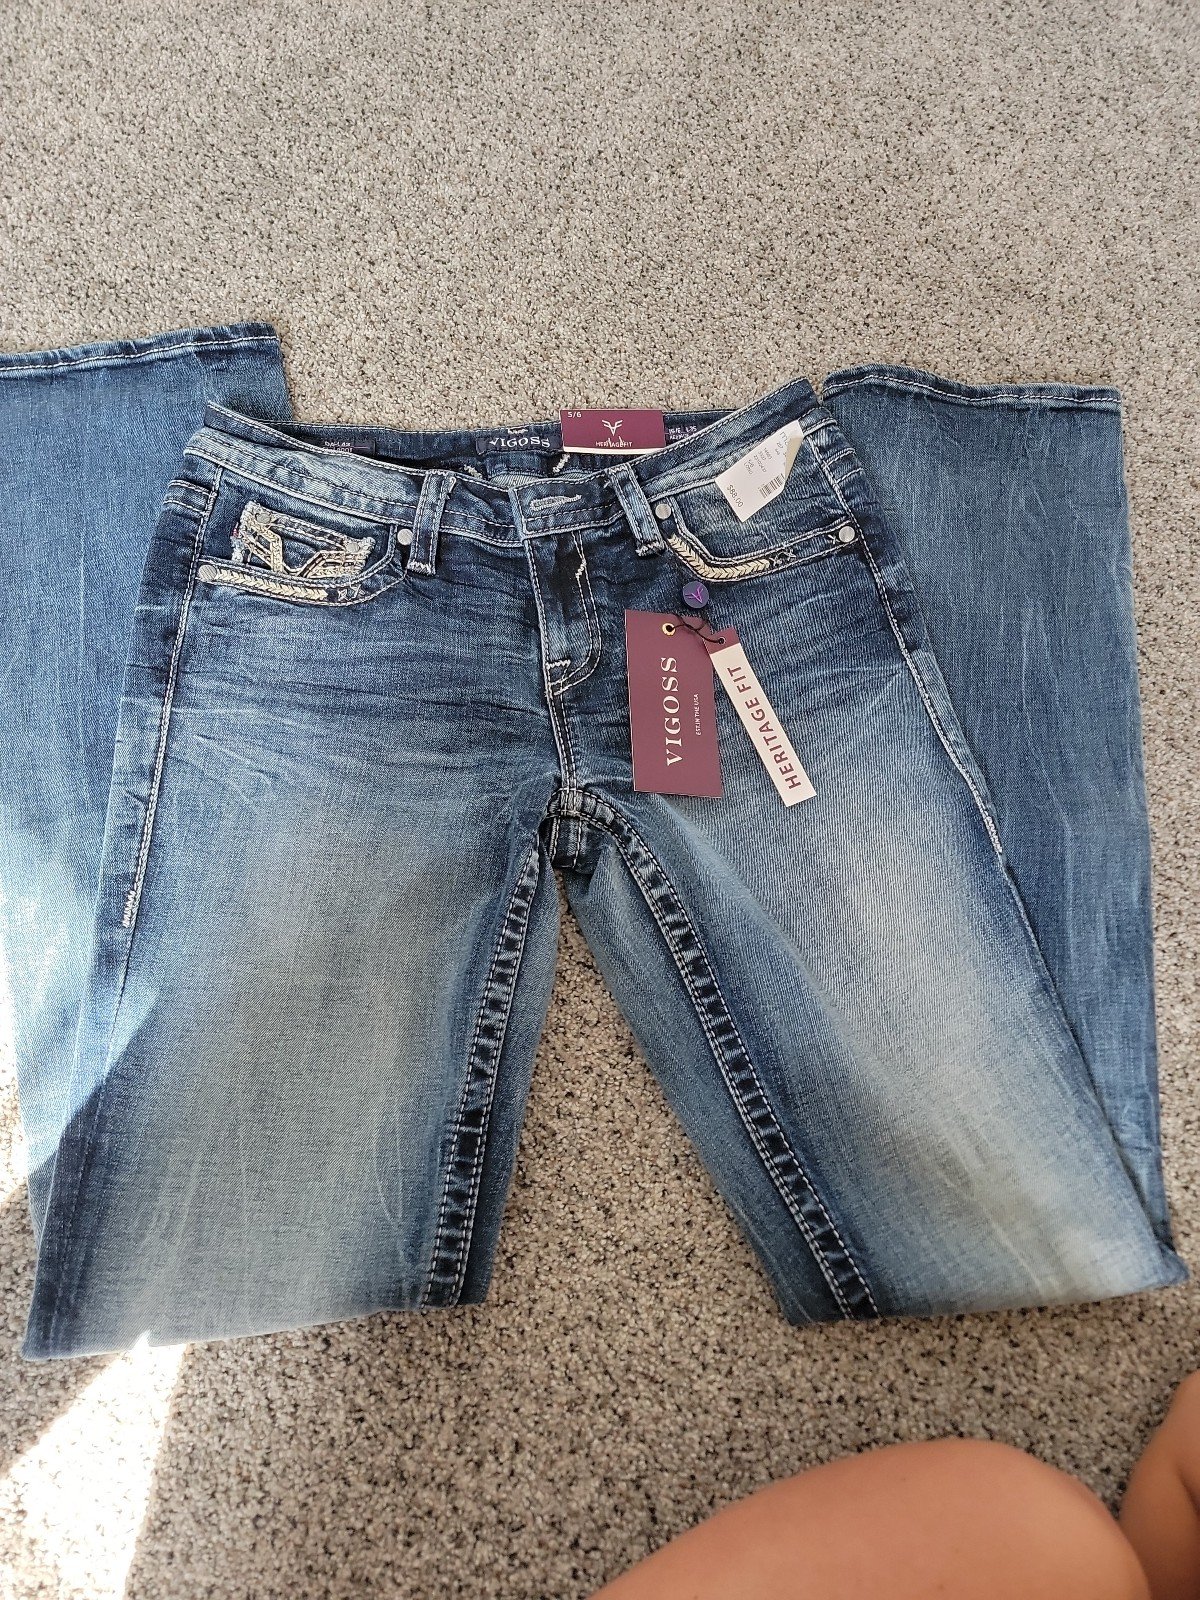 Affordable Vigoss NWT slim boot Jeans 5/6 35L or3kNu4Zf